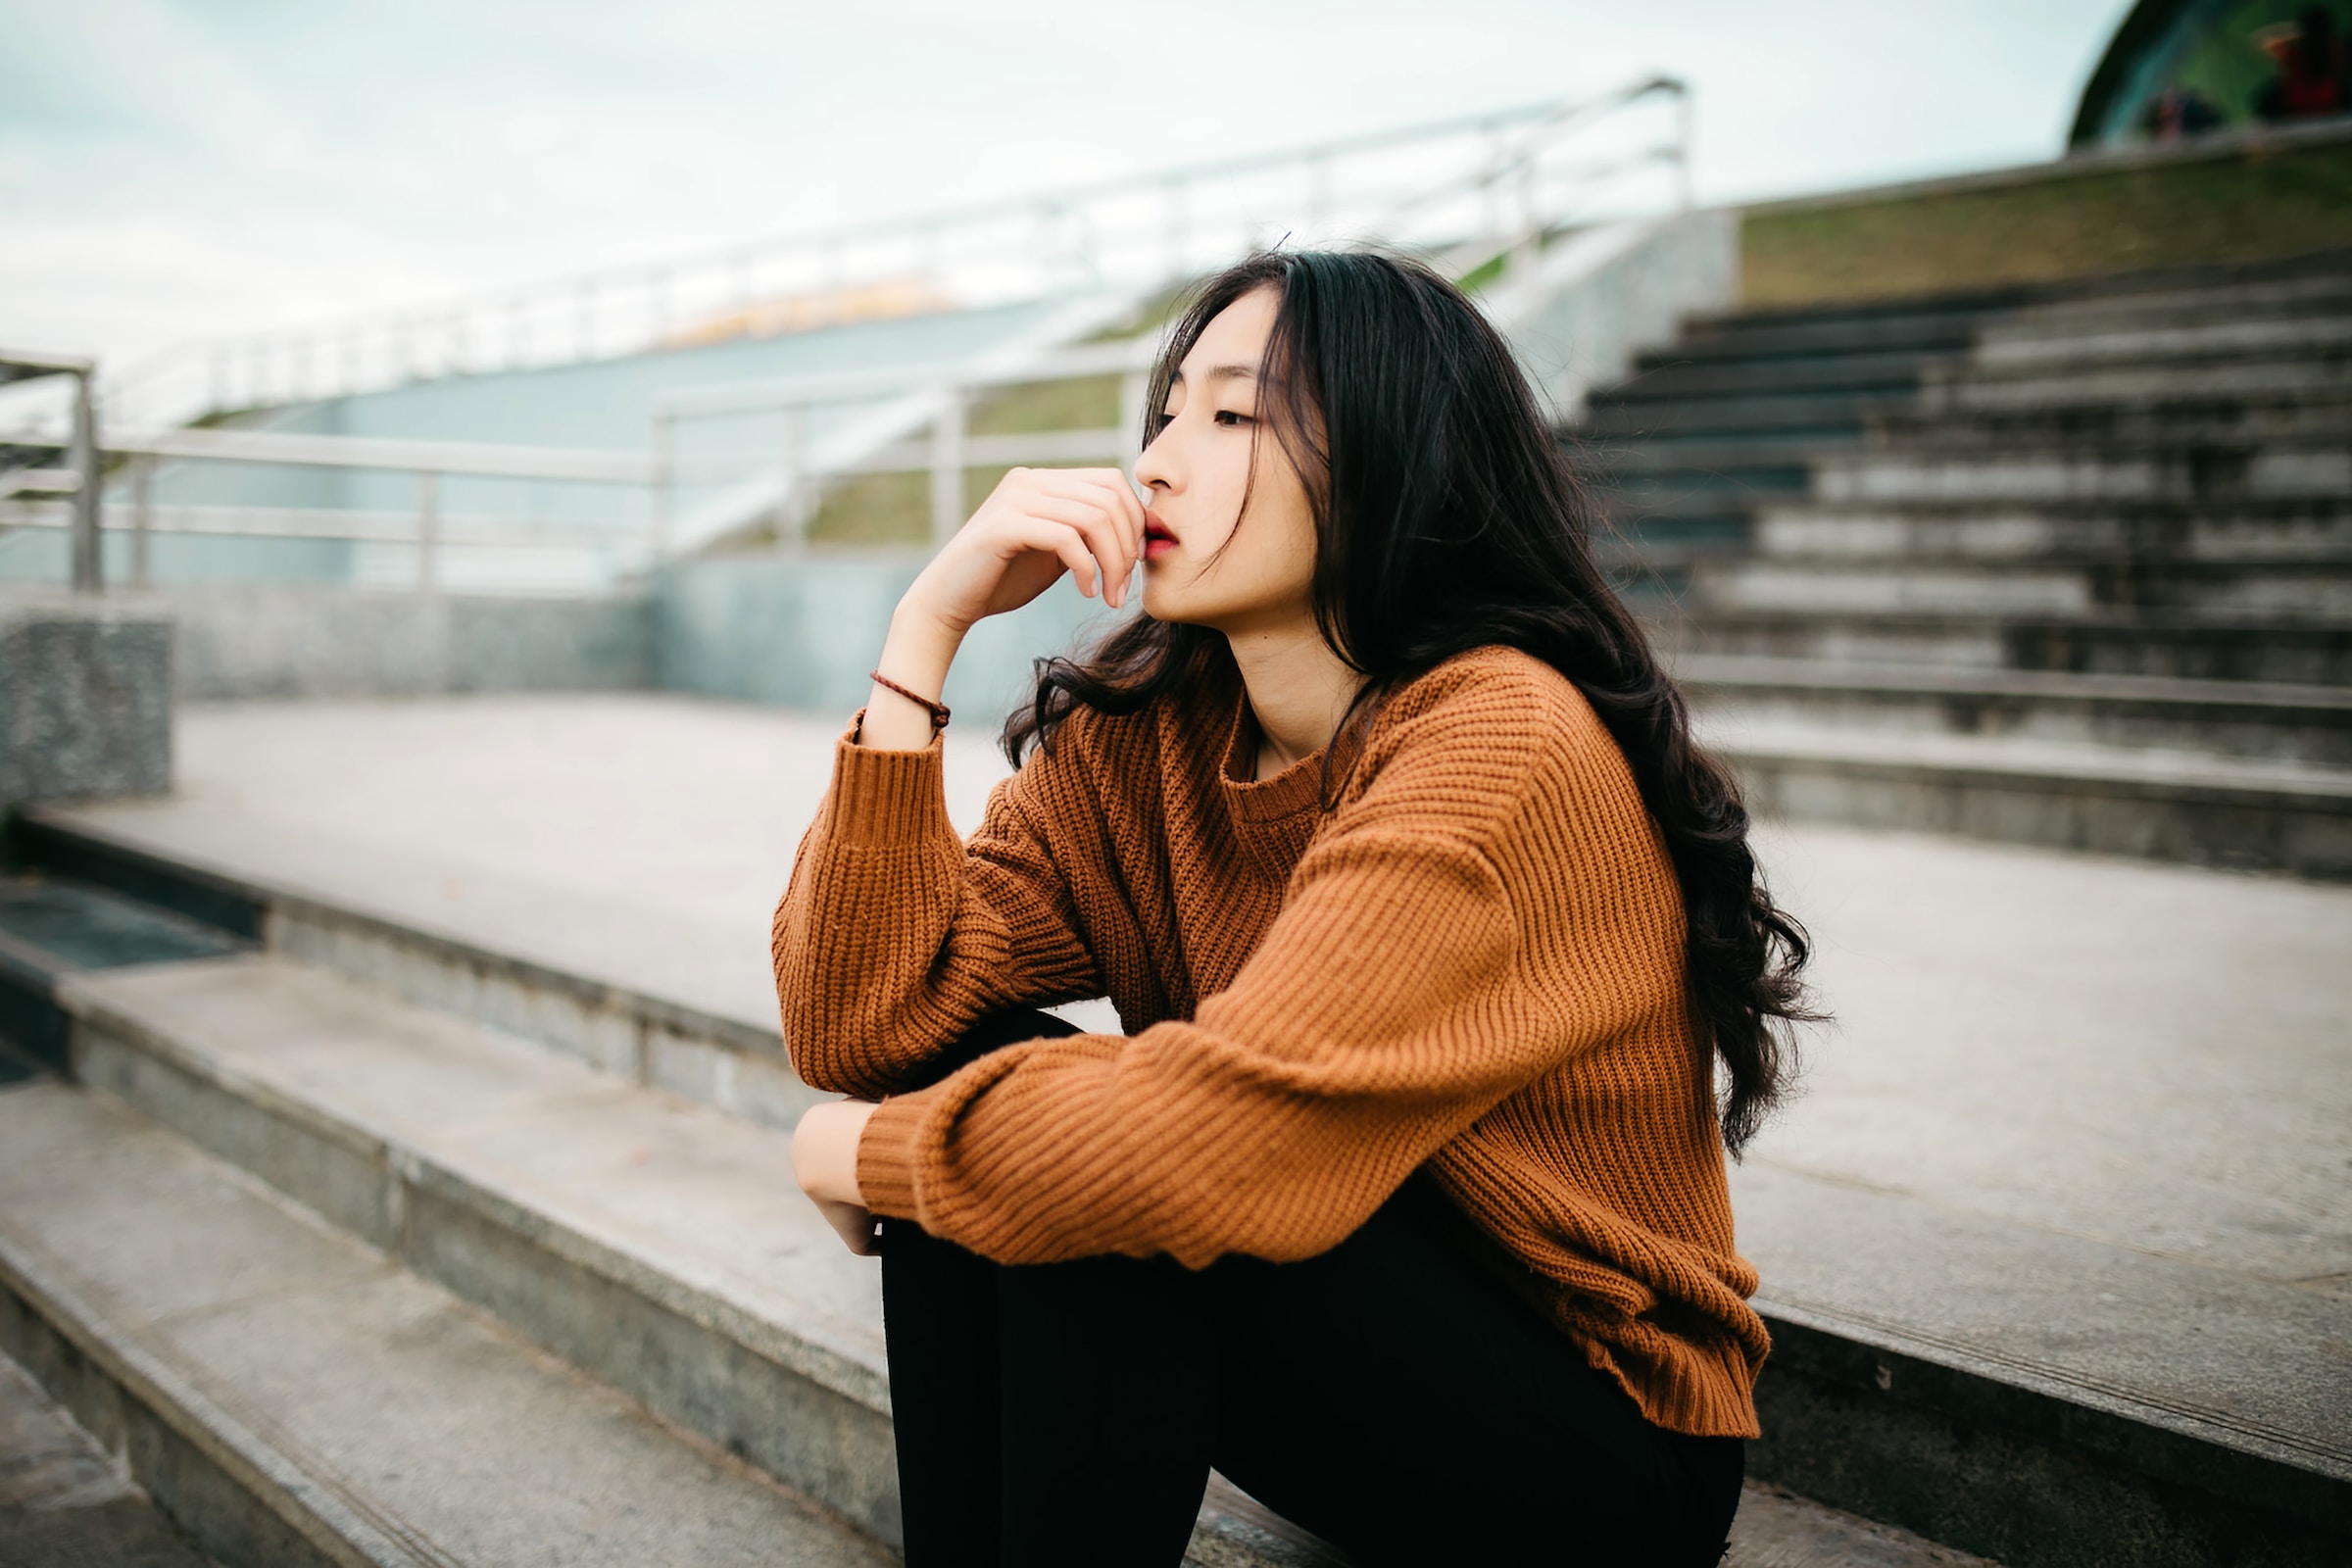 Woman thinking on some steps. | Source: Unsplash